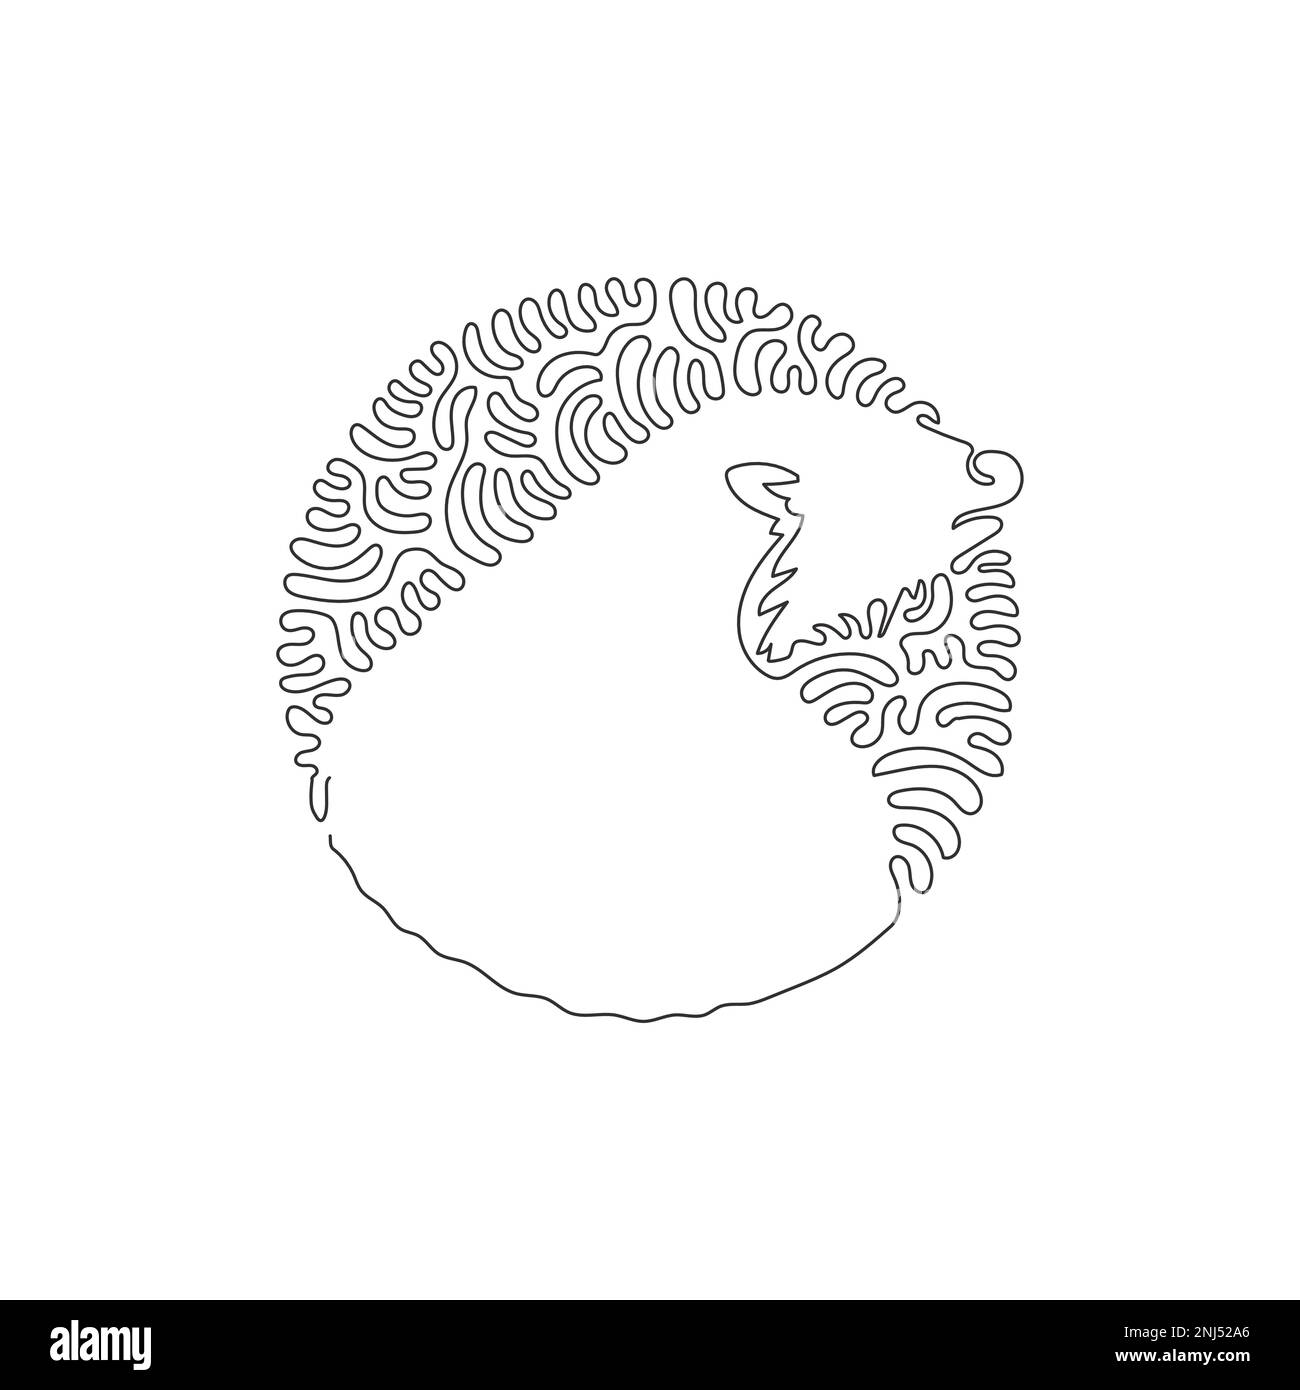 Single curly one line drawing of cute otter abstract art. Continuous line drawing vector illustration of otters having long, slim bodies Stock Vector